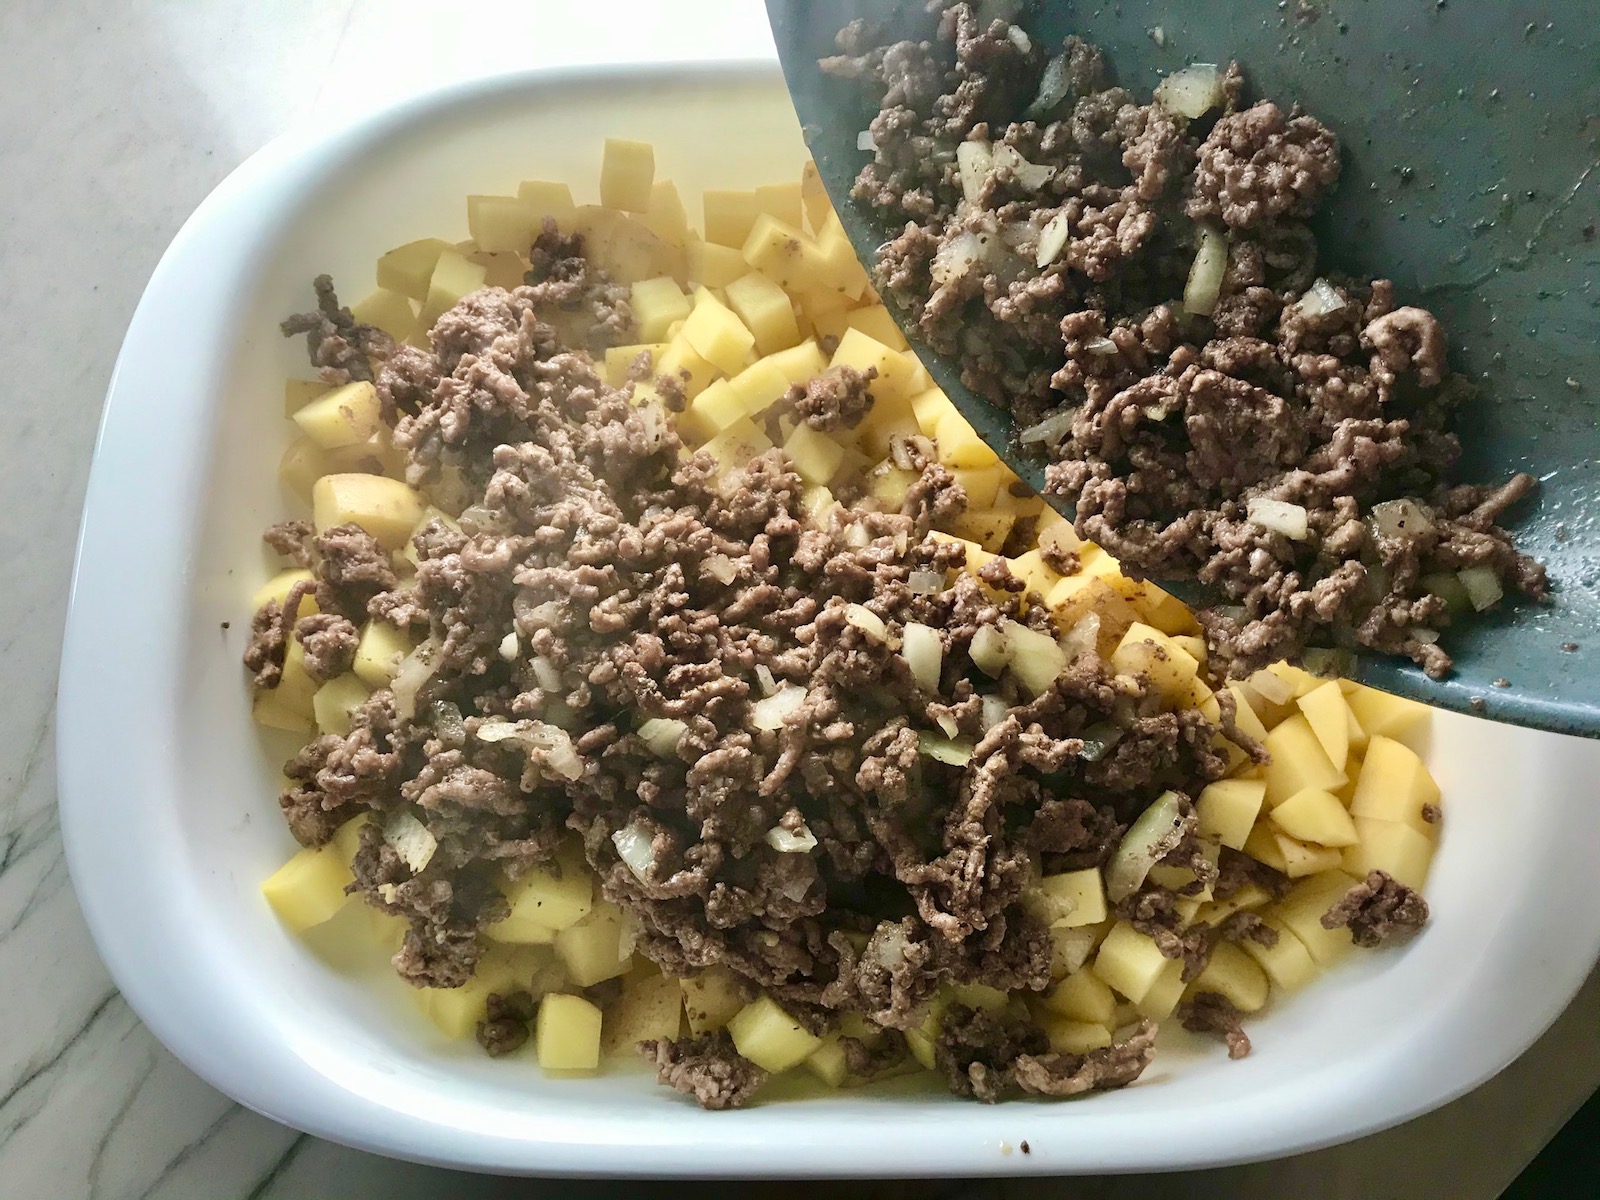 Pan pouring cooked ground beef and onions over diced raw potatoes for Cheesy Hamburger Potato Casserole. It's an easy, yummy, and cozy weeknight family dinner. 